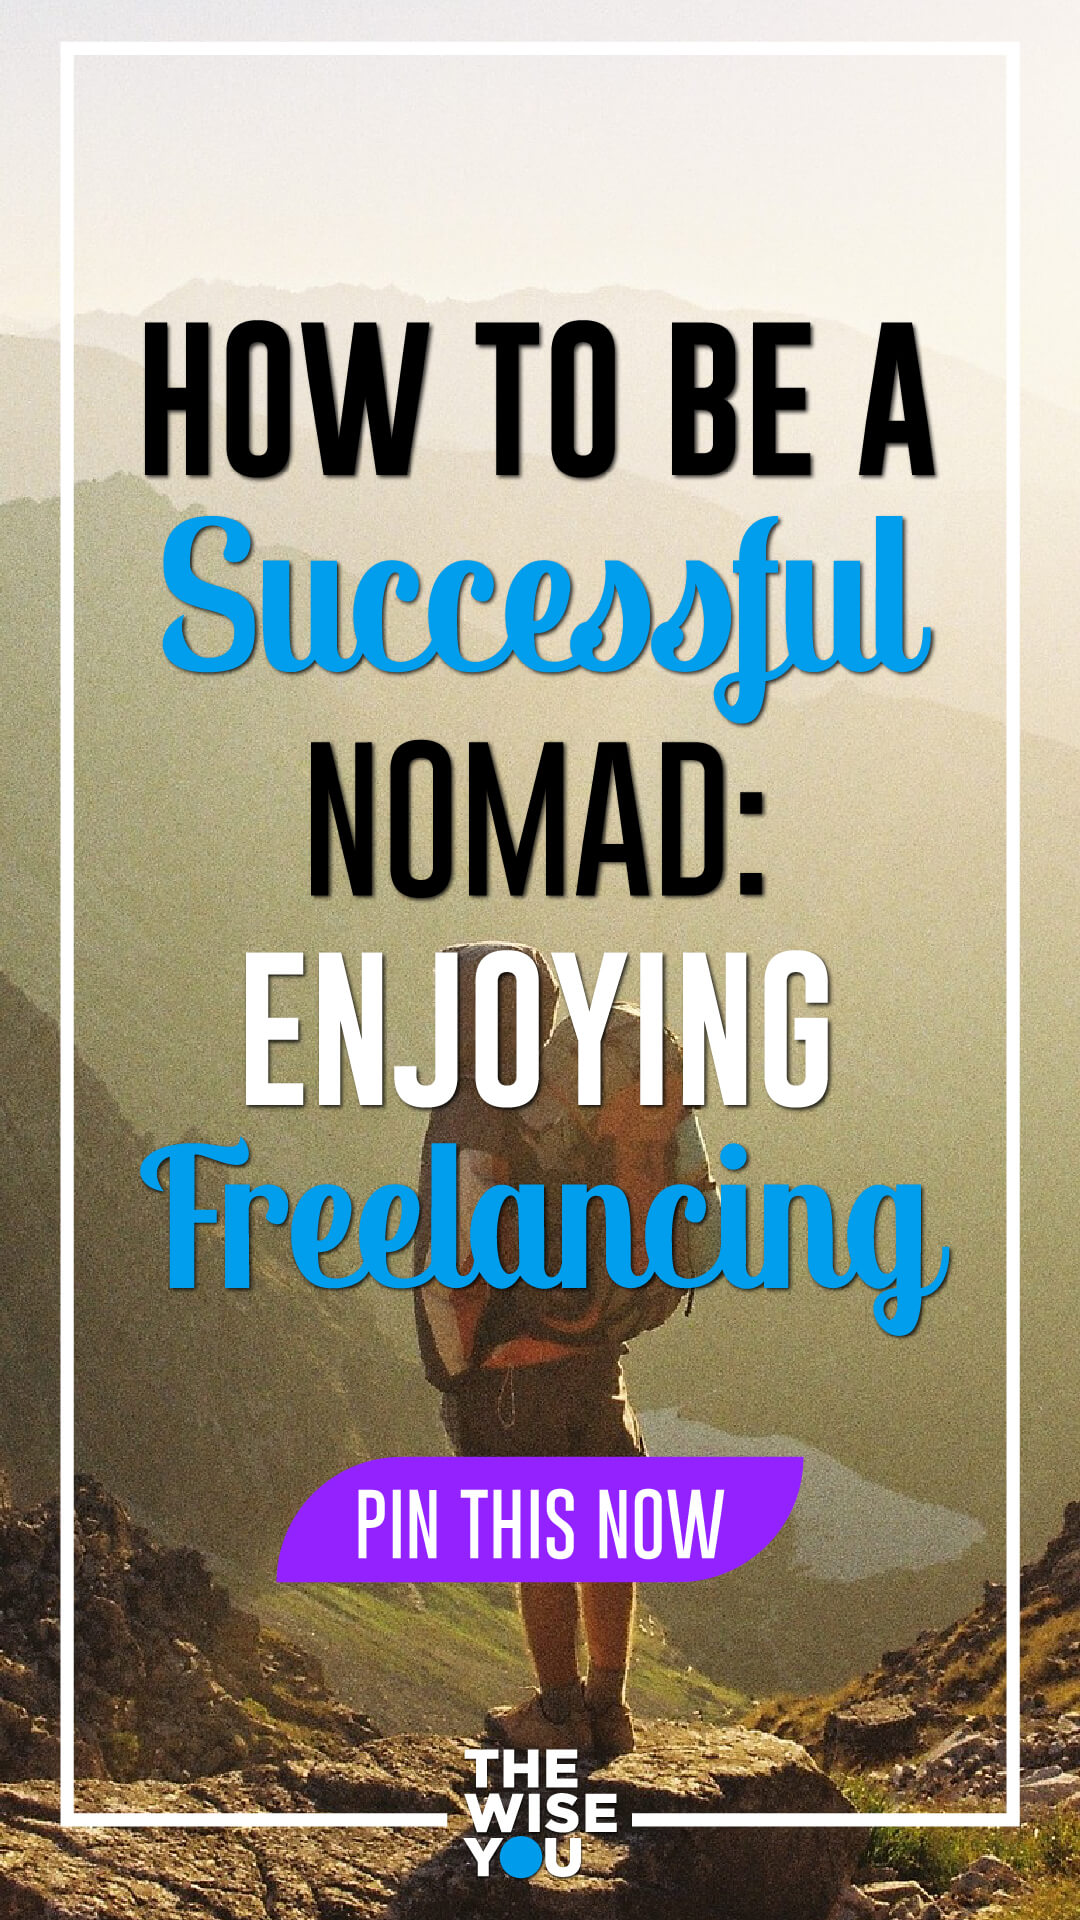 How To Be A Successful Nomad: Enjoying Freelancing